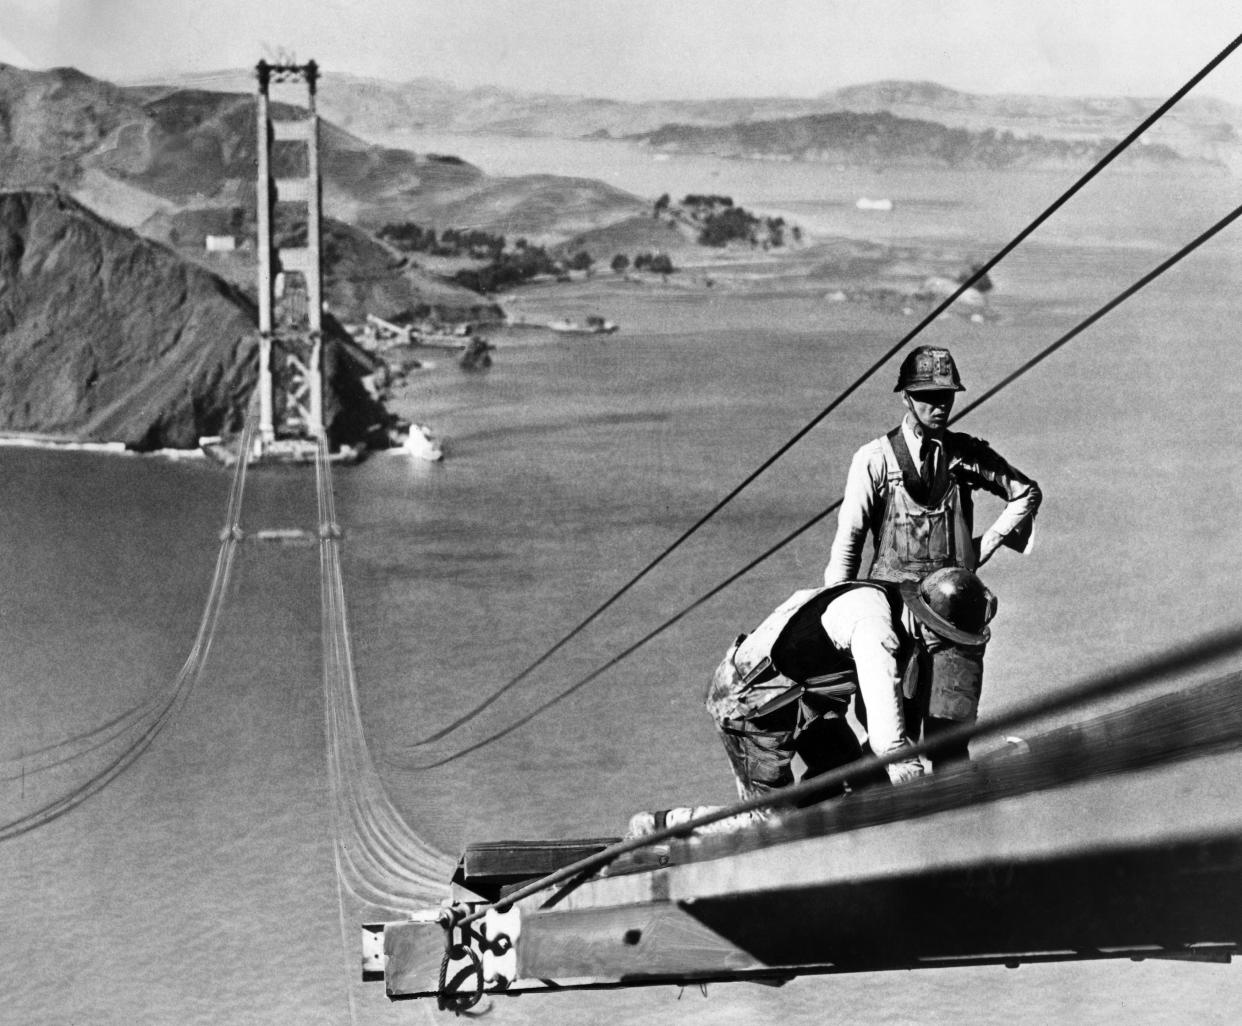 Picture dated October 1935 of the Golden Gate bridge, in the San Francisco Bay, during its construction. Construction began on 05 January 1933 and the bridge was inaugurated 27 May 1937 by Franklin Delano Roosevelt, who pushed a button in Washington, DC, signaling the official start of vehicle traffic over the Bridge. Idea of the engineer Joseph Strauss, it was the largest suspension bridge in the world. (Photo credit should read OFF/AFP via Getty Images)